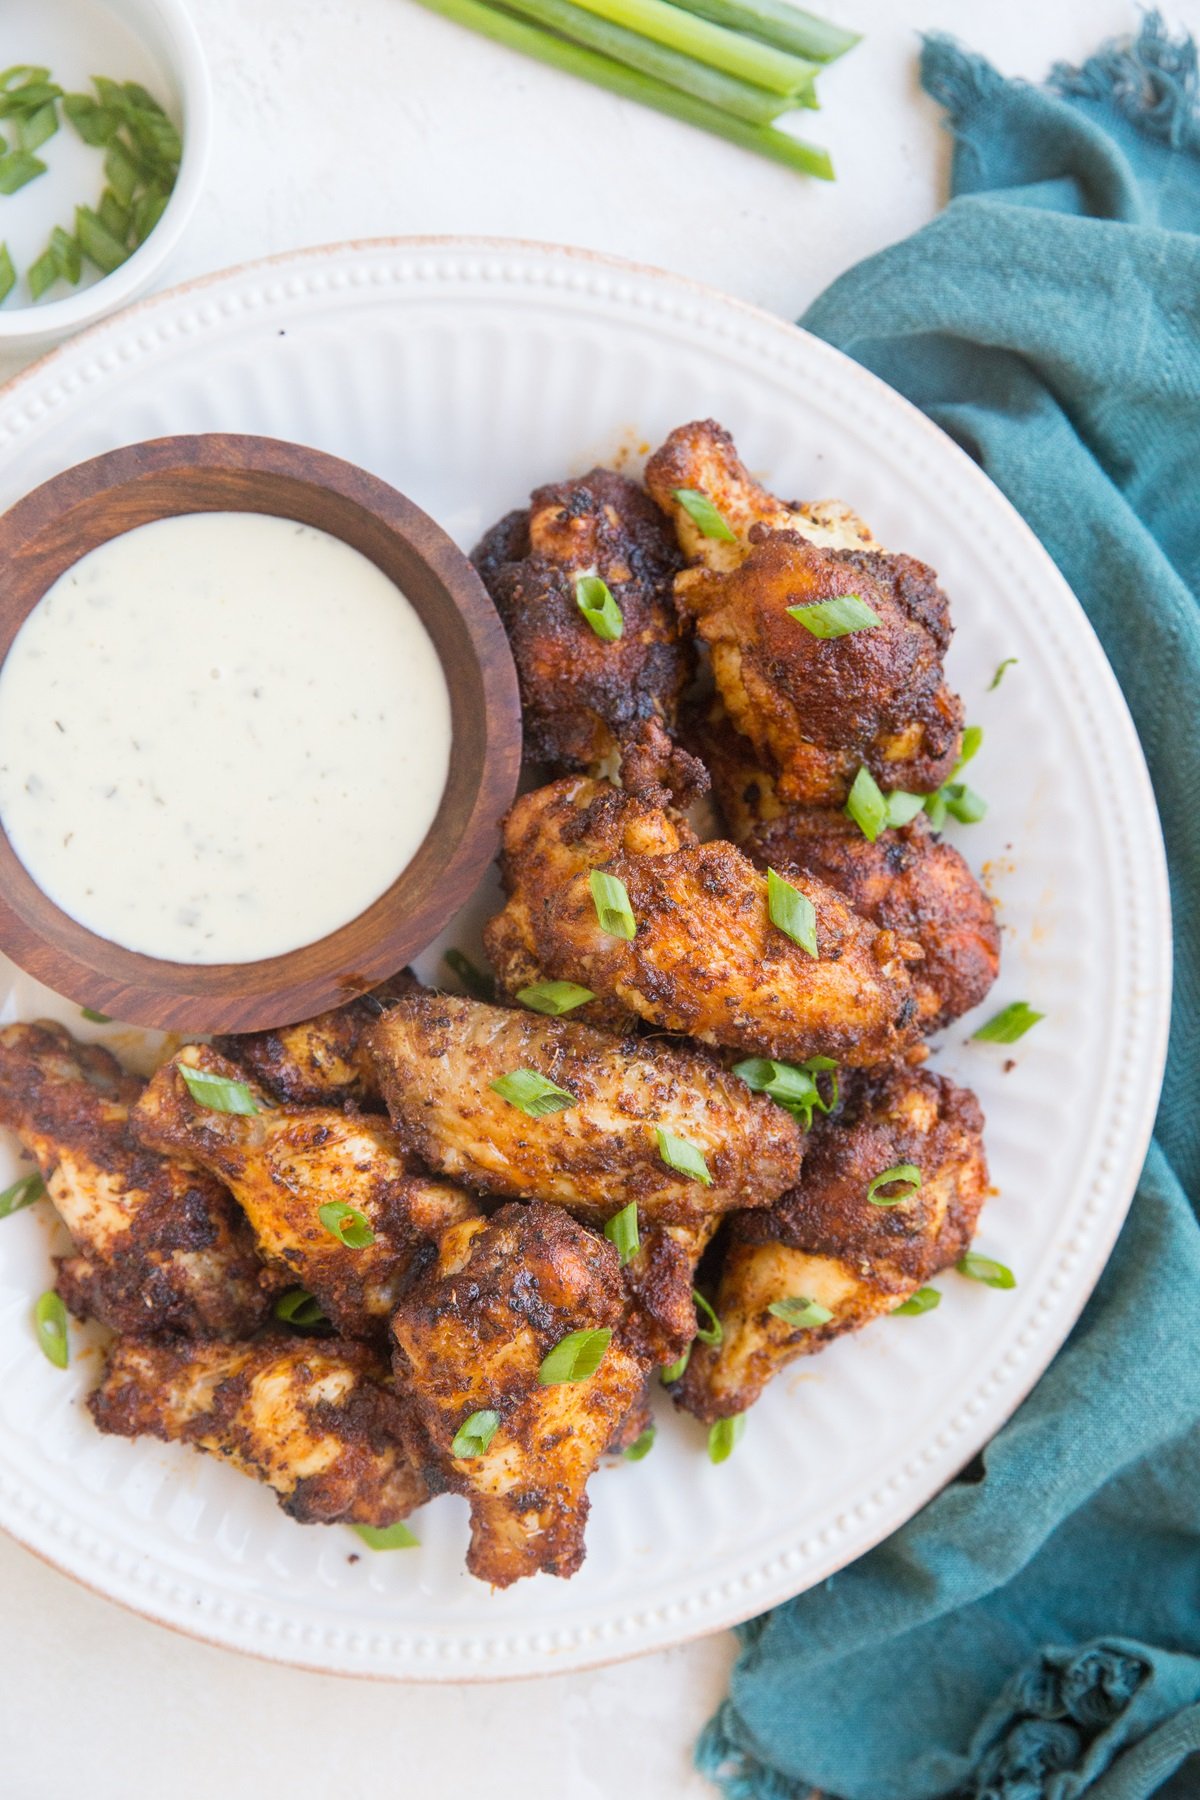 Easy Air Fryer Chicken Wings with a delicious dry rub. Quick, simple, perfectly crispy yet tender!